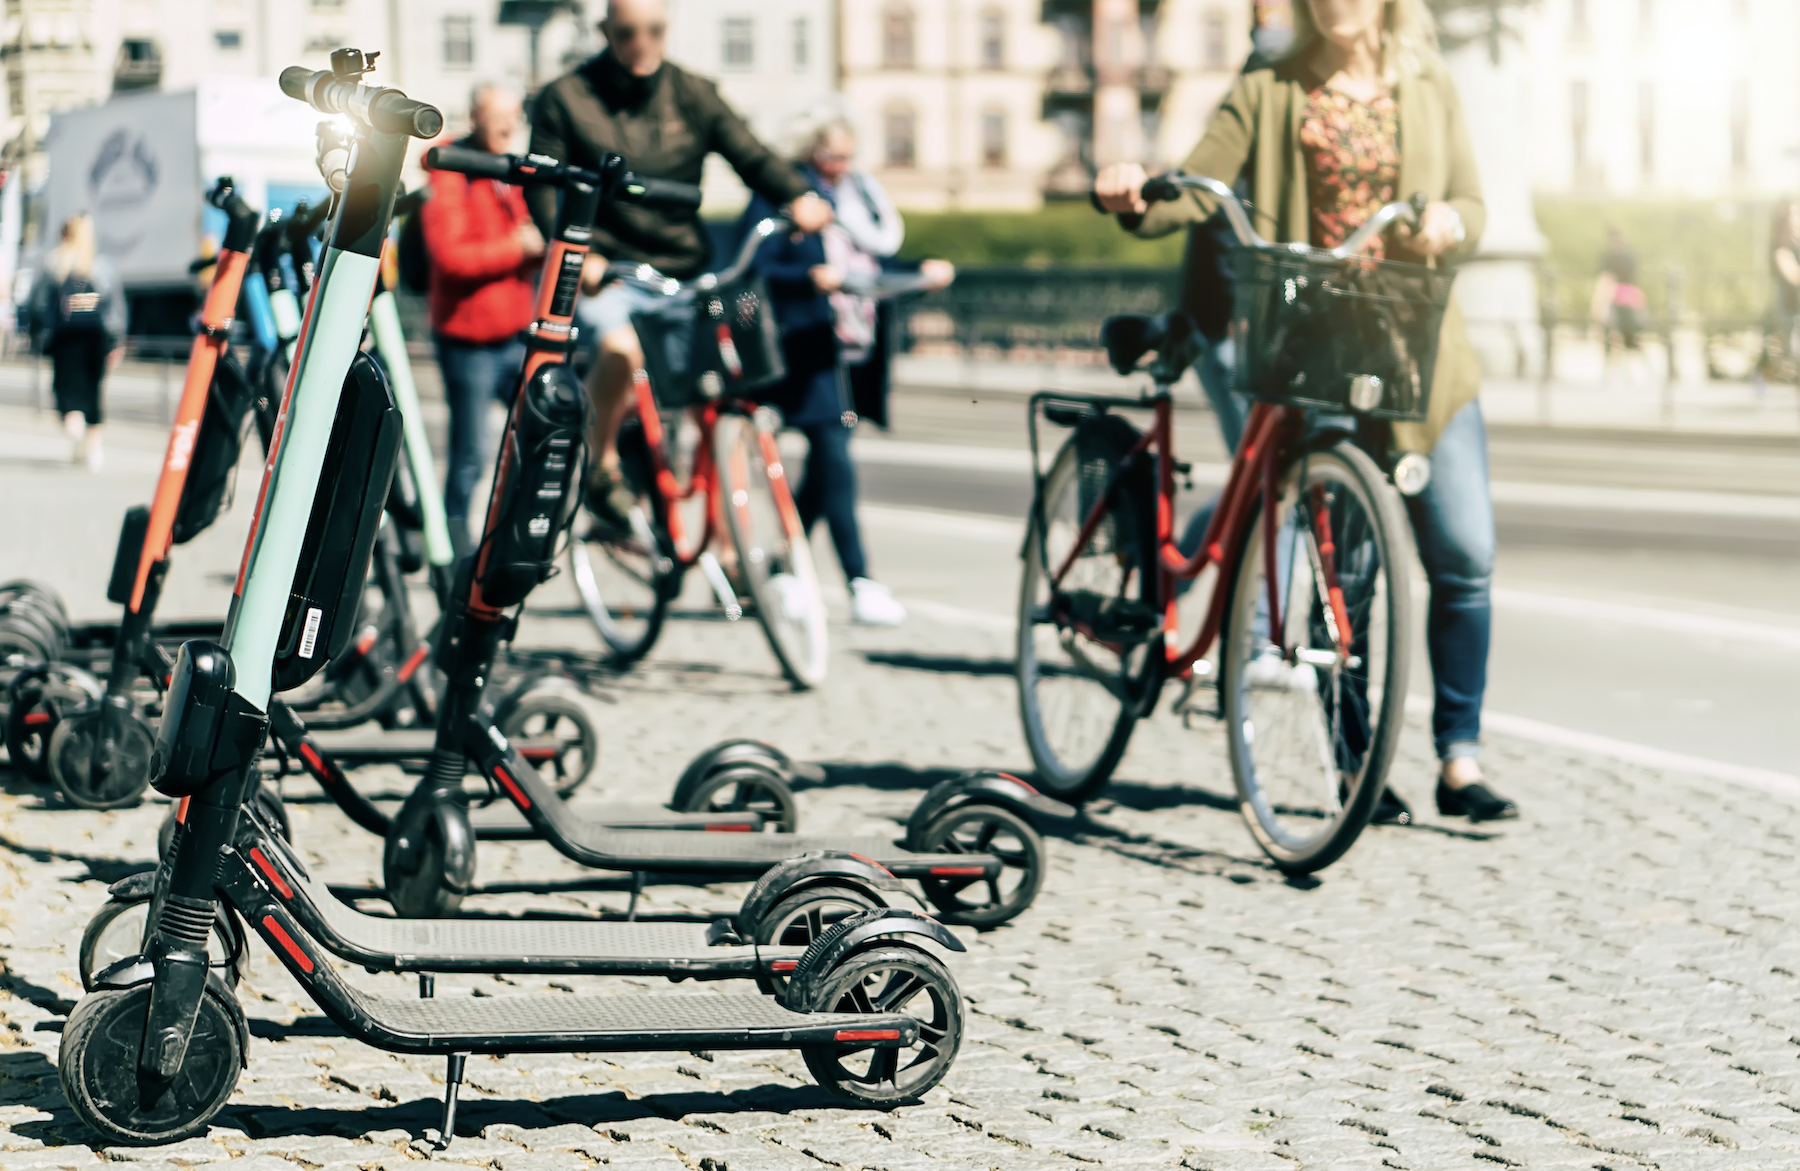 The future of micromobility, shared e-scooters and people with bicycles